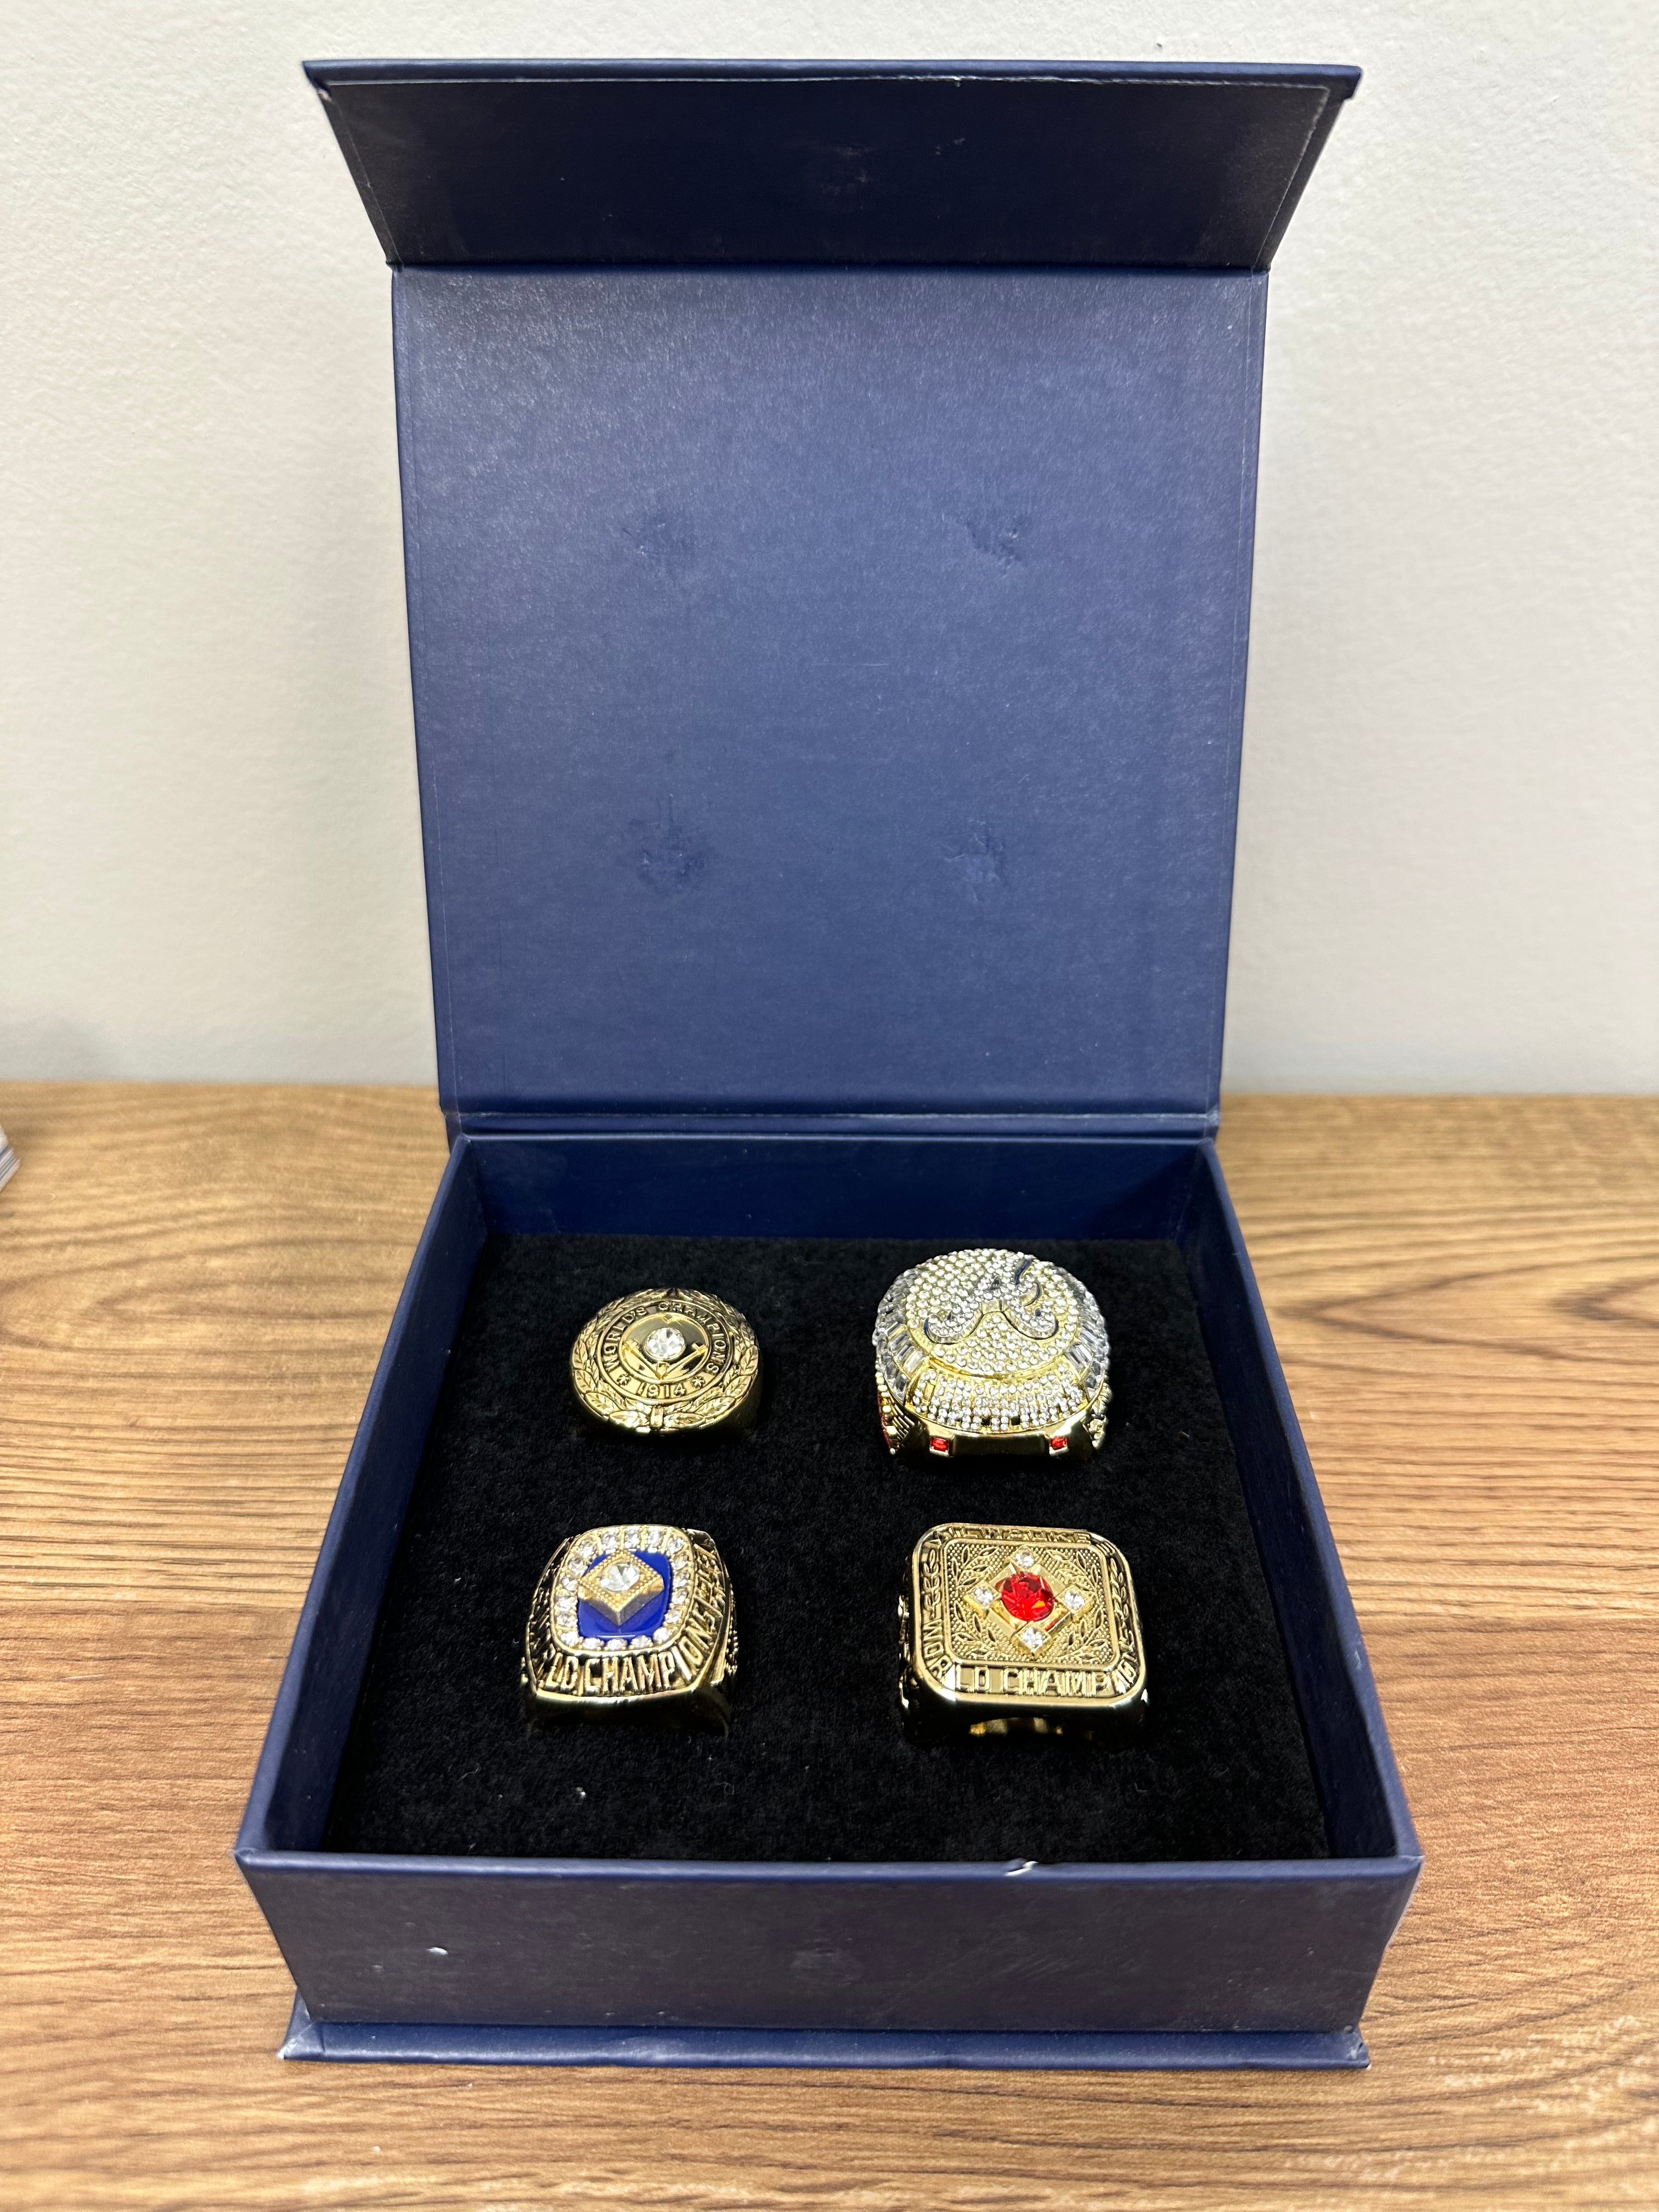 ATL 2021 Braves 13 ACUNA,JR Christmas Gift Series Cubs World Replica Champions Ring Set Atlanta Championship Rings with Wooden Box Gifts Women Mens